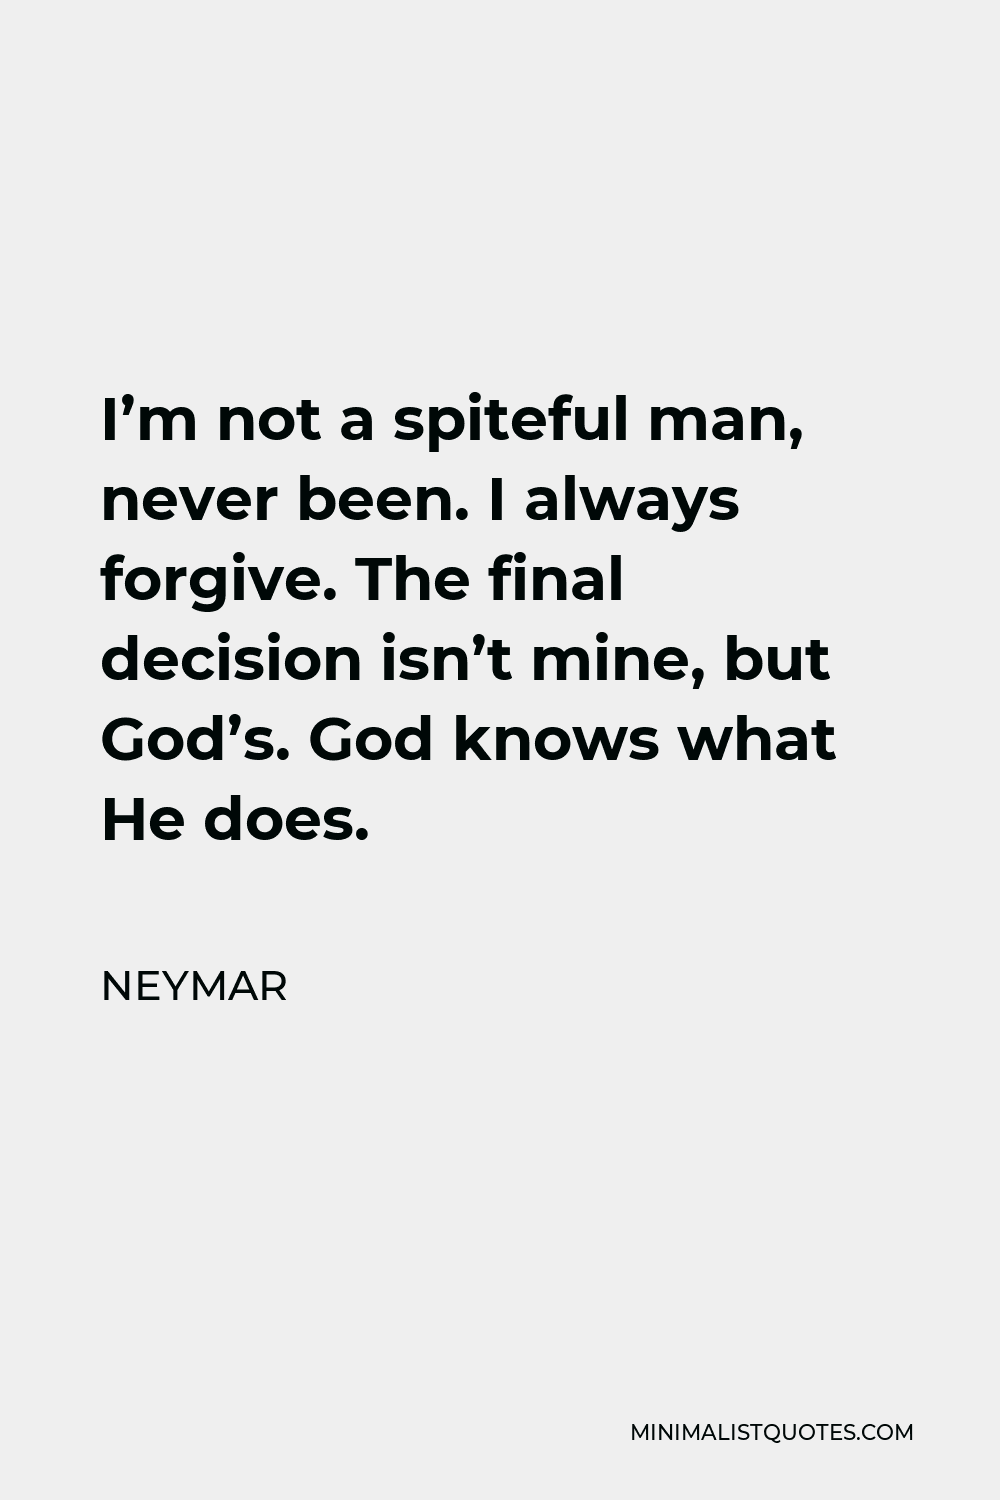 Neymar Quote - I’m not a spiteful man, never been. I always forgive. The final decision isn’t mine, but God’s. God knows what He does.